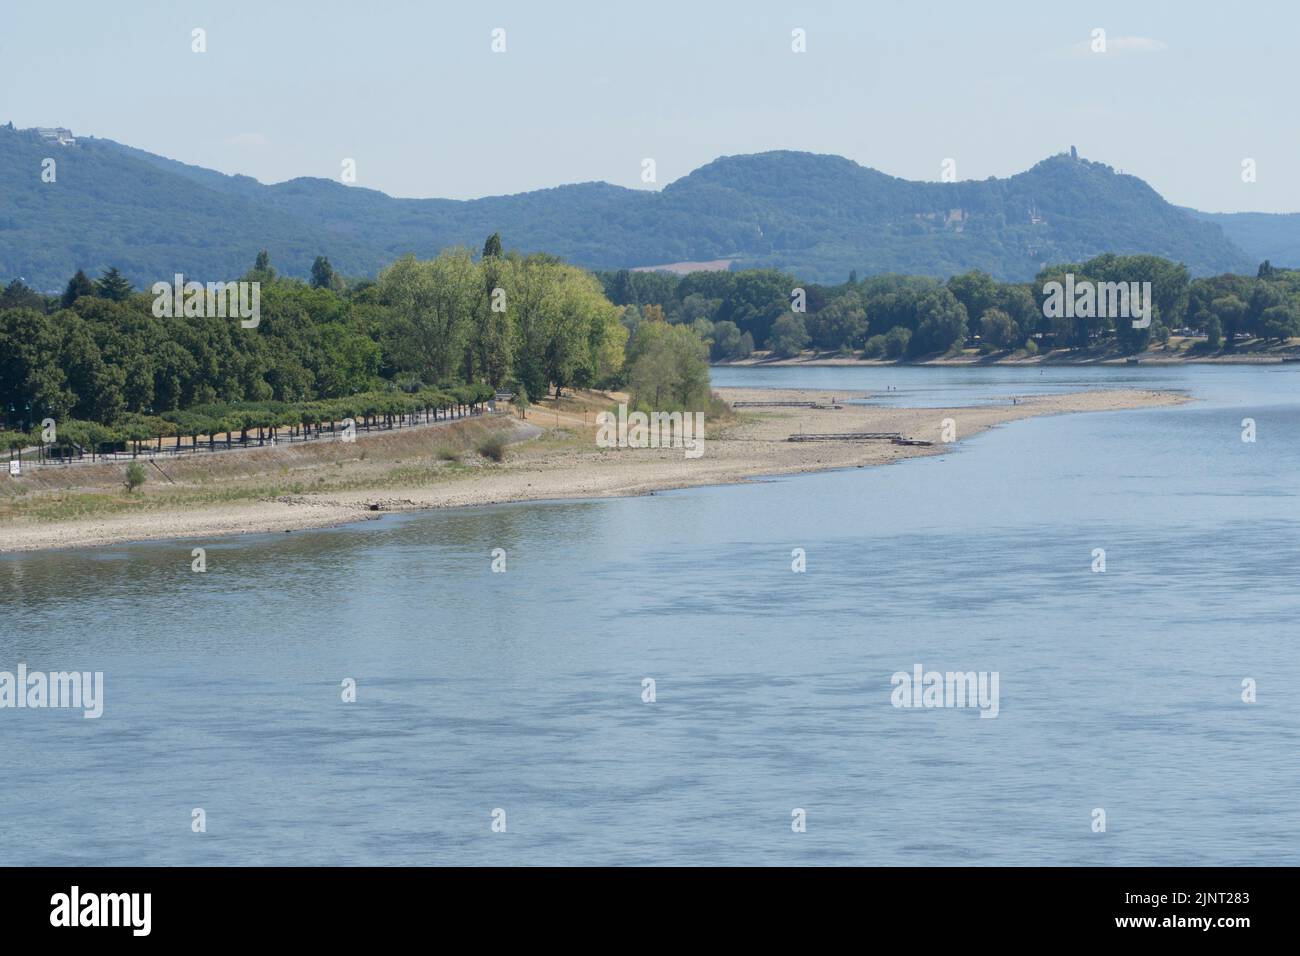 Bonn, Germany, 13 August 2022: The Rhine at Bonn is much lower than usual, exposing sandbars and stranding ferries normally used by commuters. The drought in Western Europe particularly threatens German freight, more of which travels by river than in other countries. Barges are having to travel with lighter loads to be able to navigate the shallow waters. Anna Watson/Alamy Live News Stock Photo